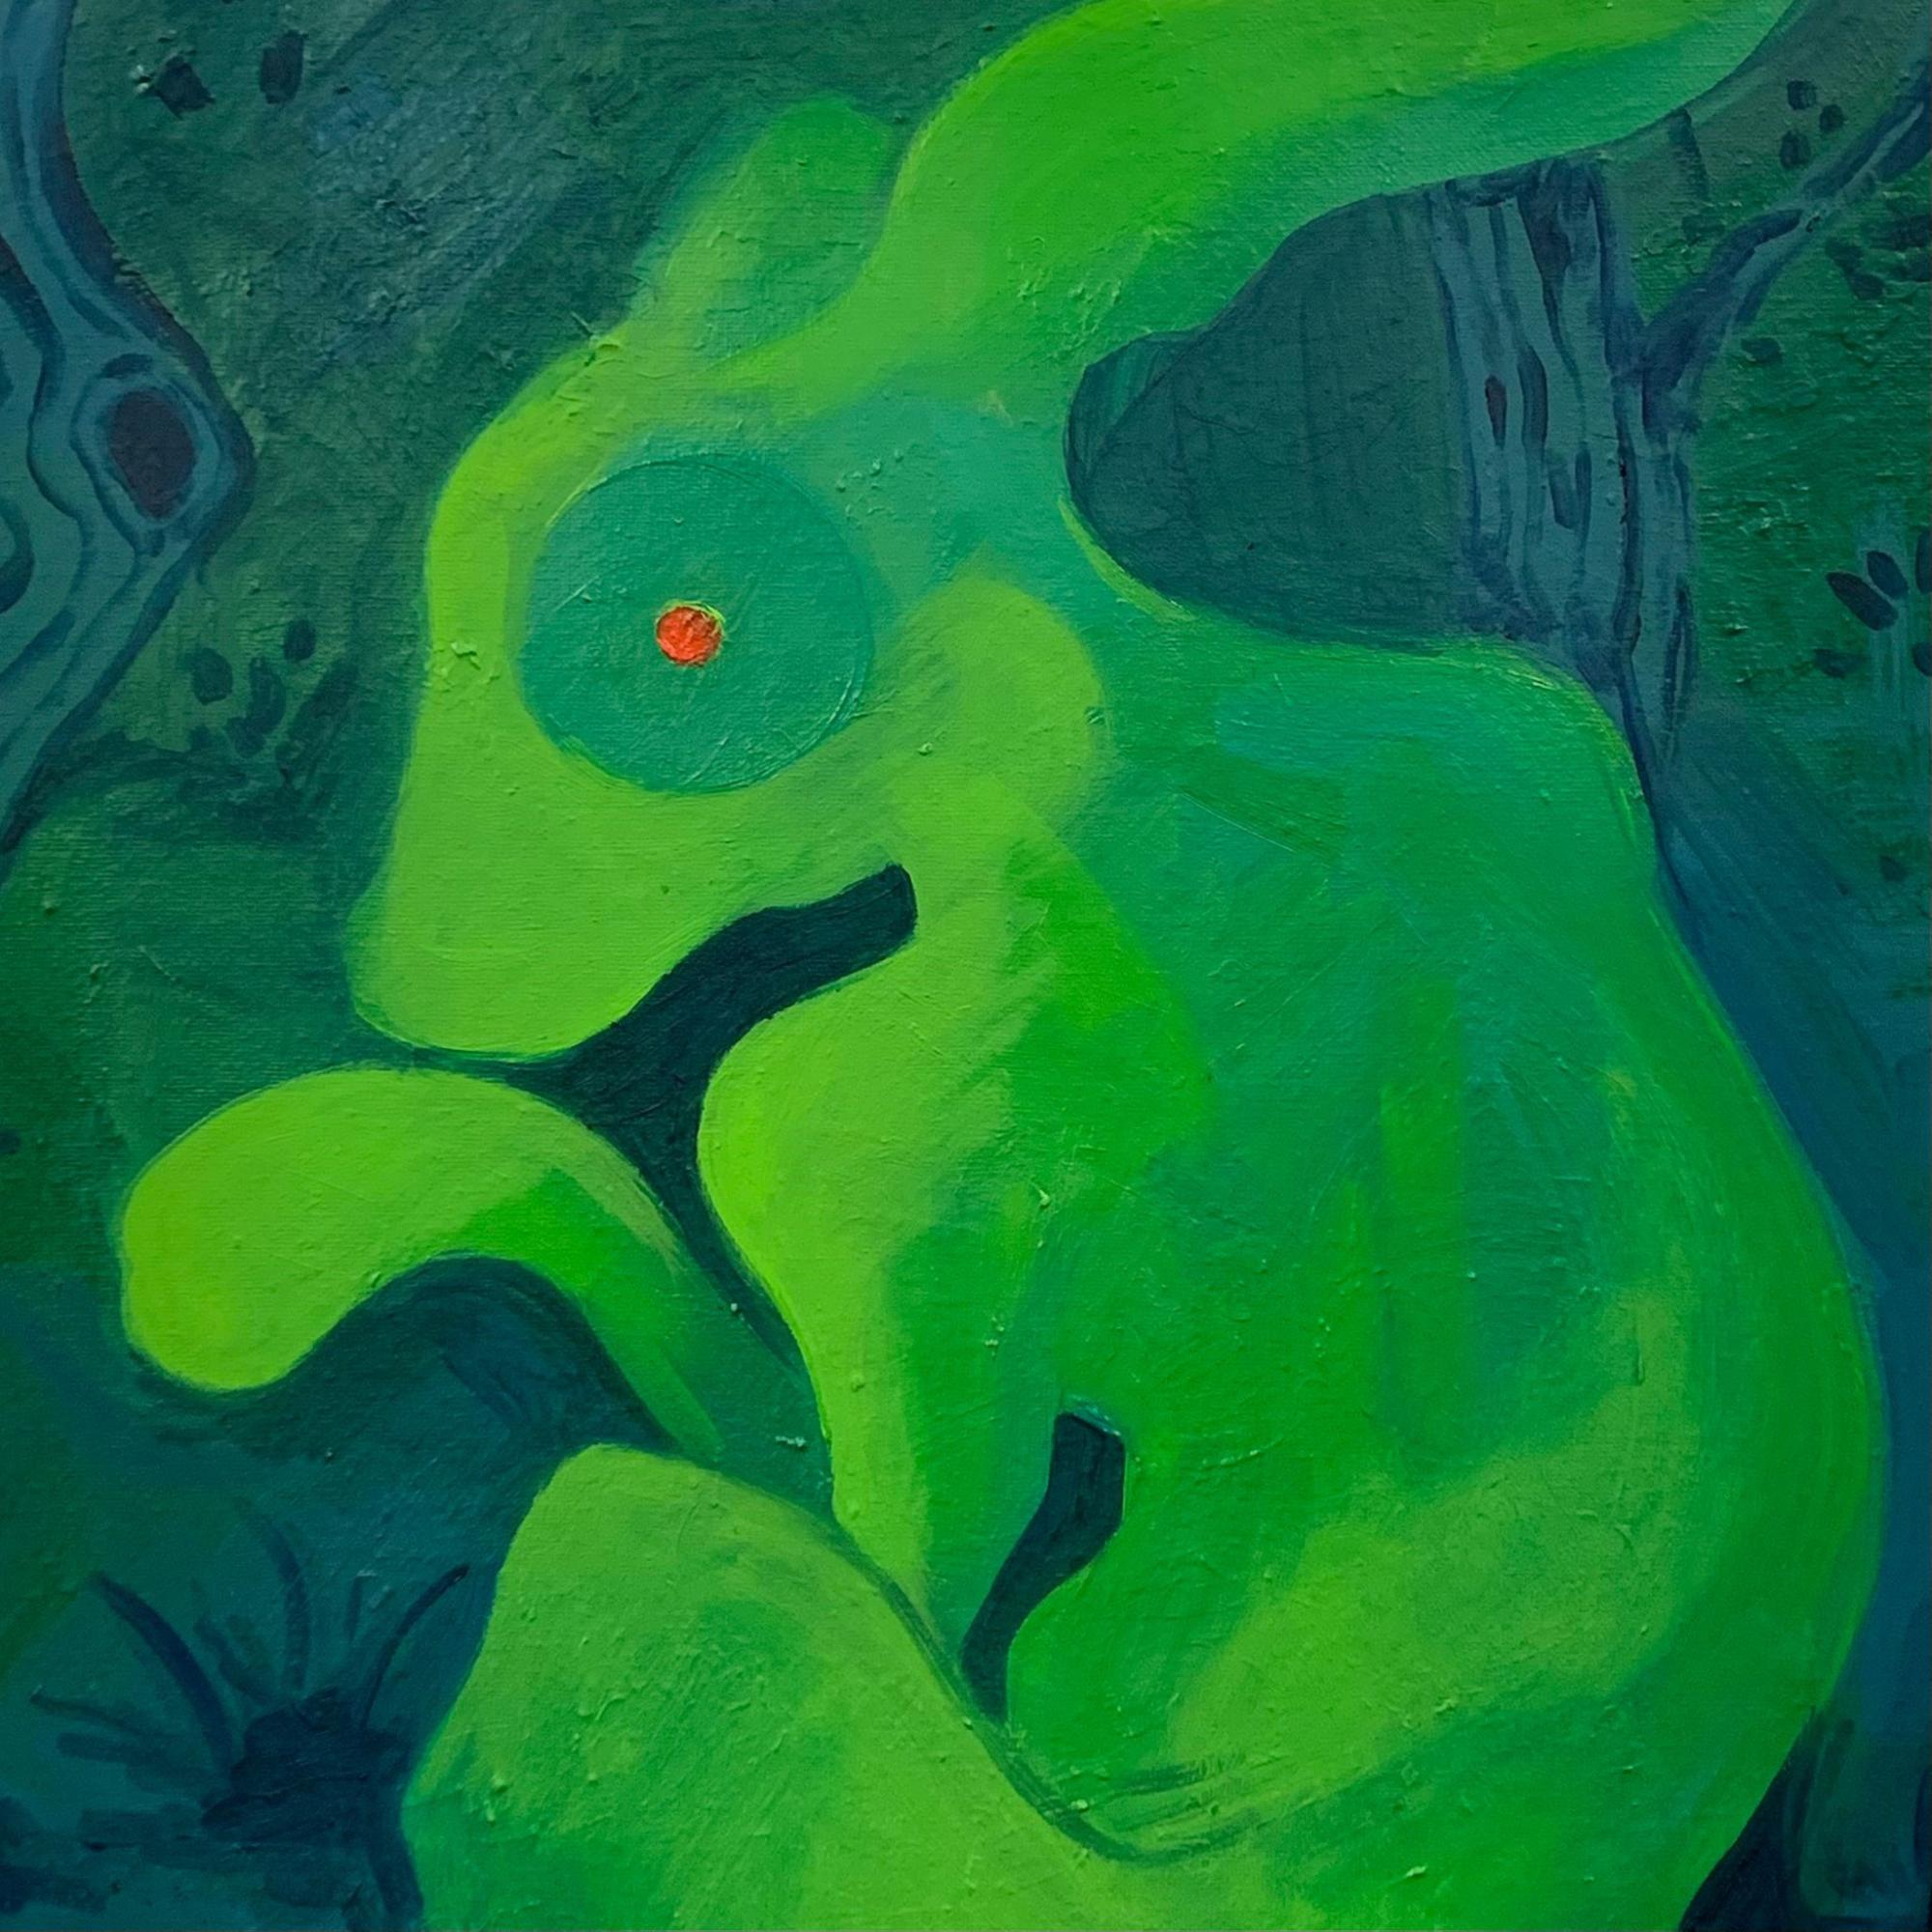 Bright green bunny with red pupil in blue forest, turning to face viewer with wary expression, as if being chased.